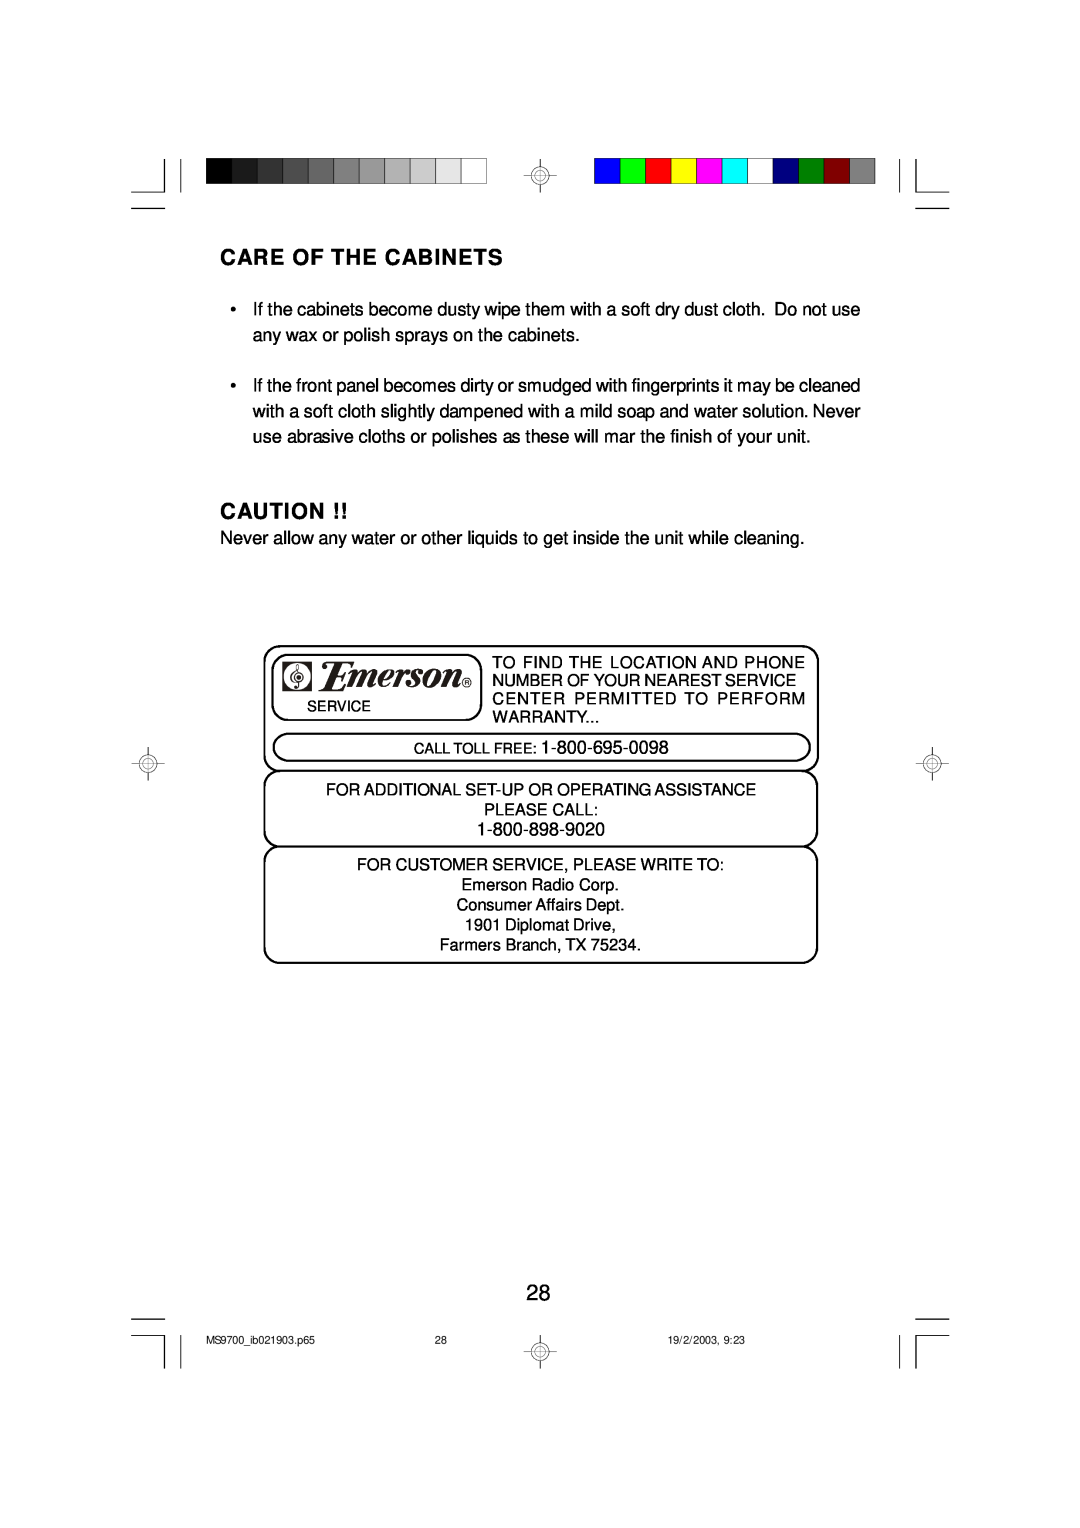 Emerson MS9700 owner manual Care Of The Cabinets 